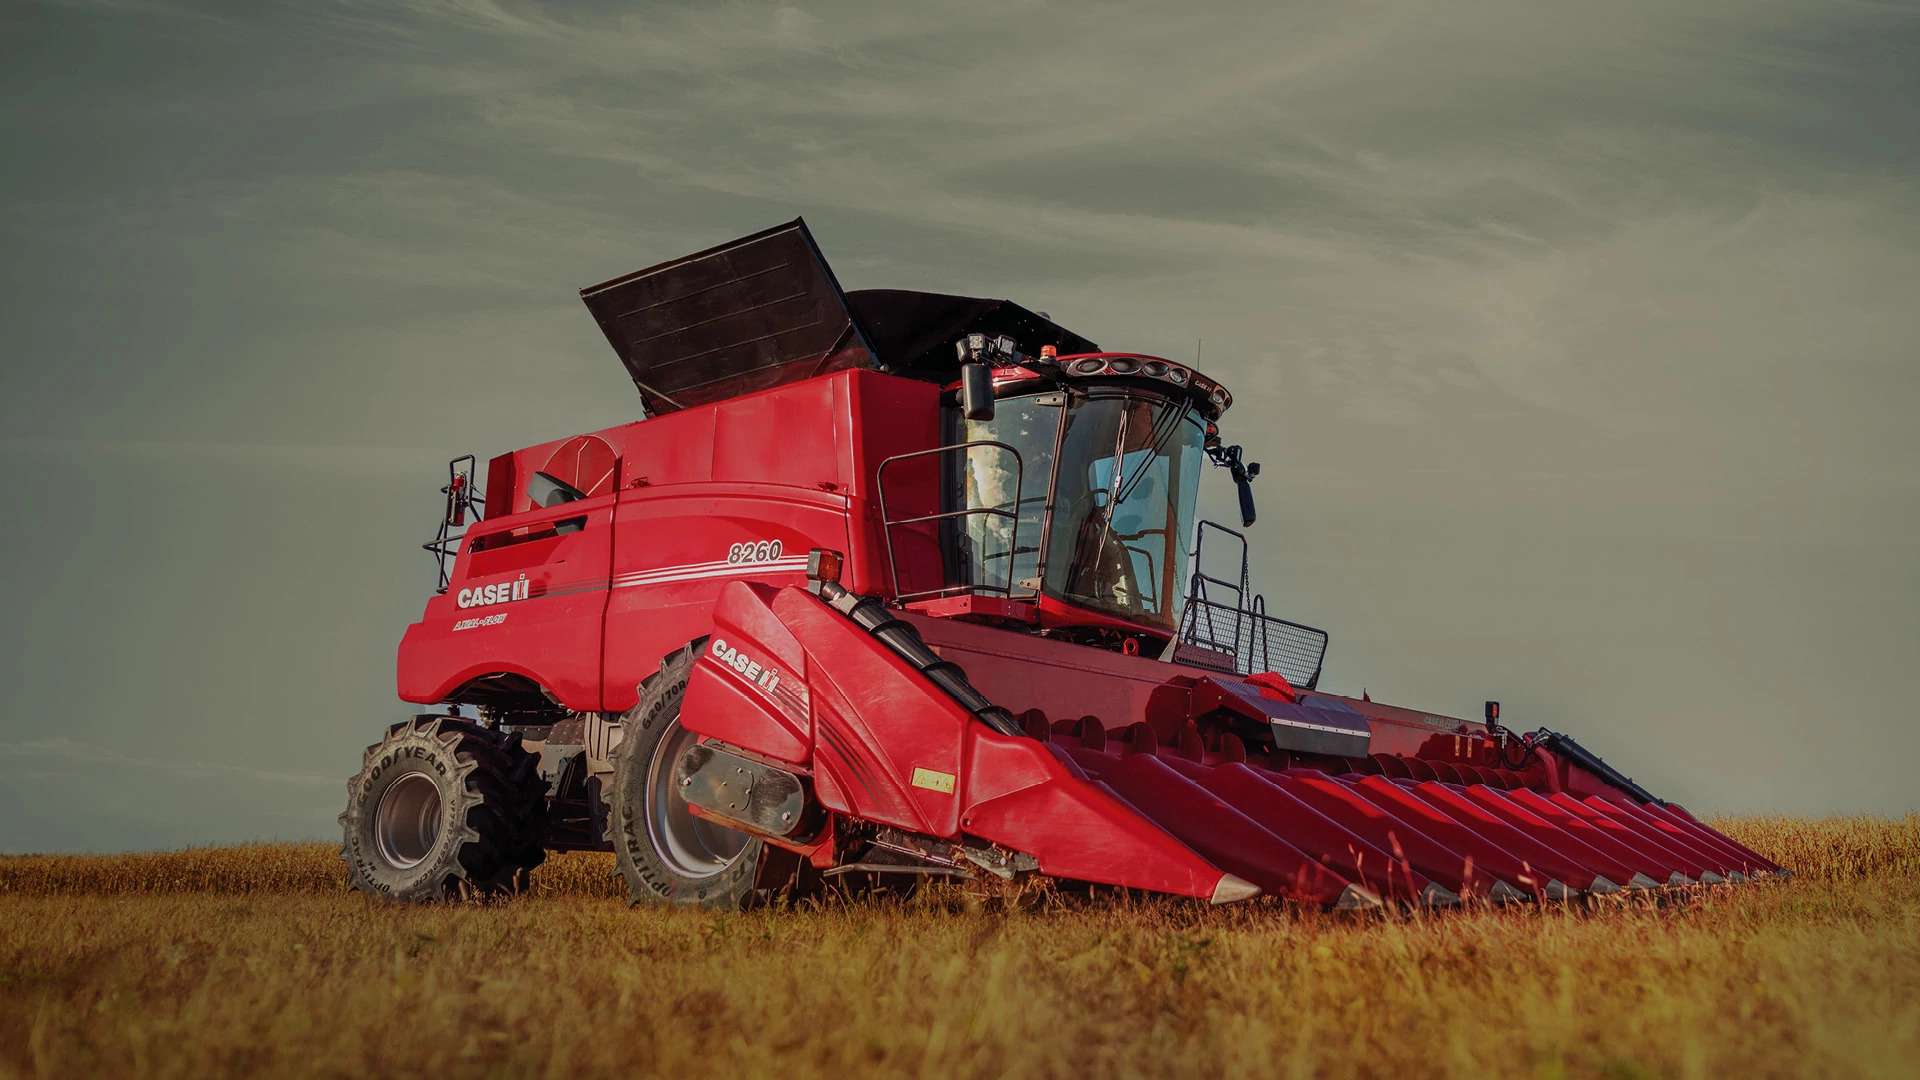 Axial-flow 8260 alone in field with dark overlay